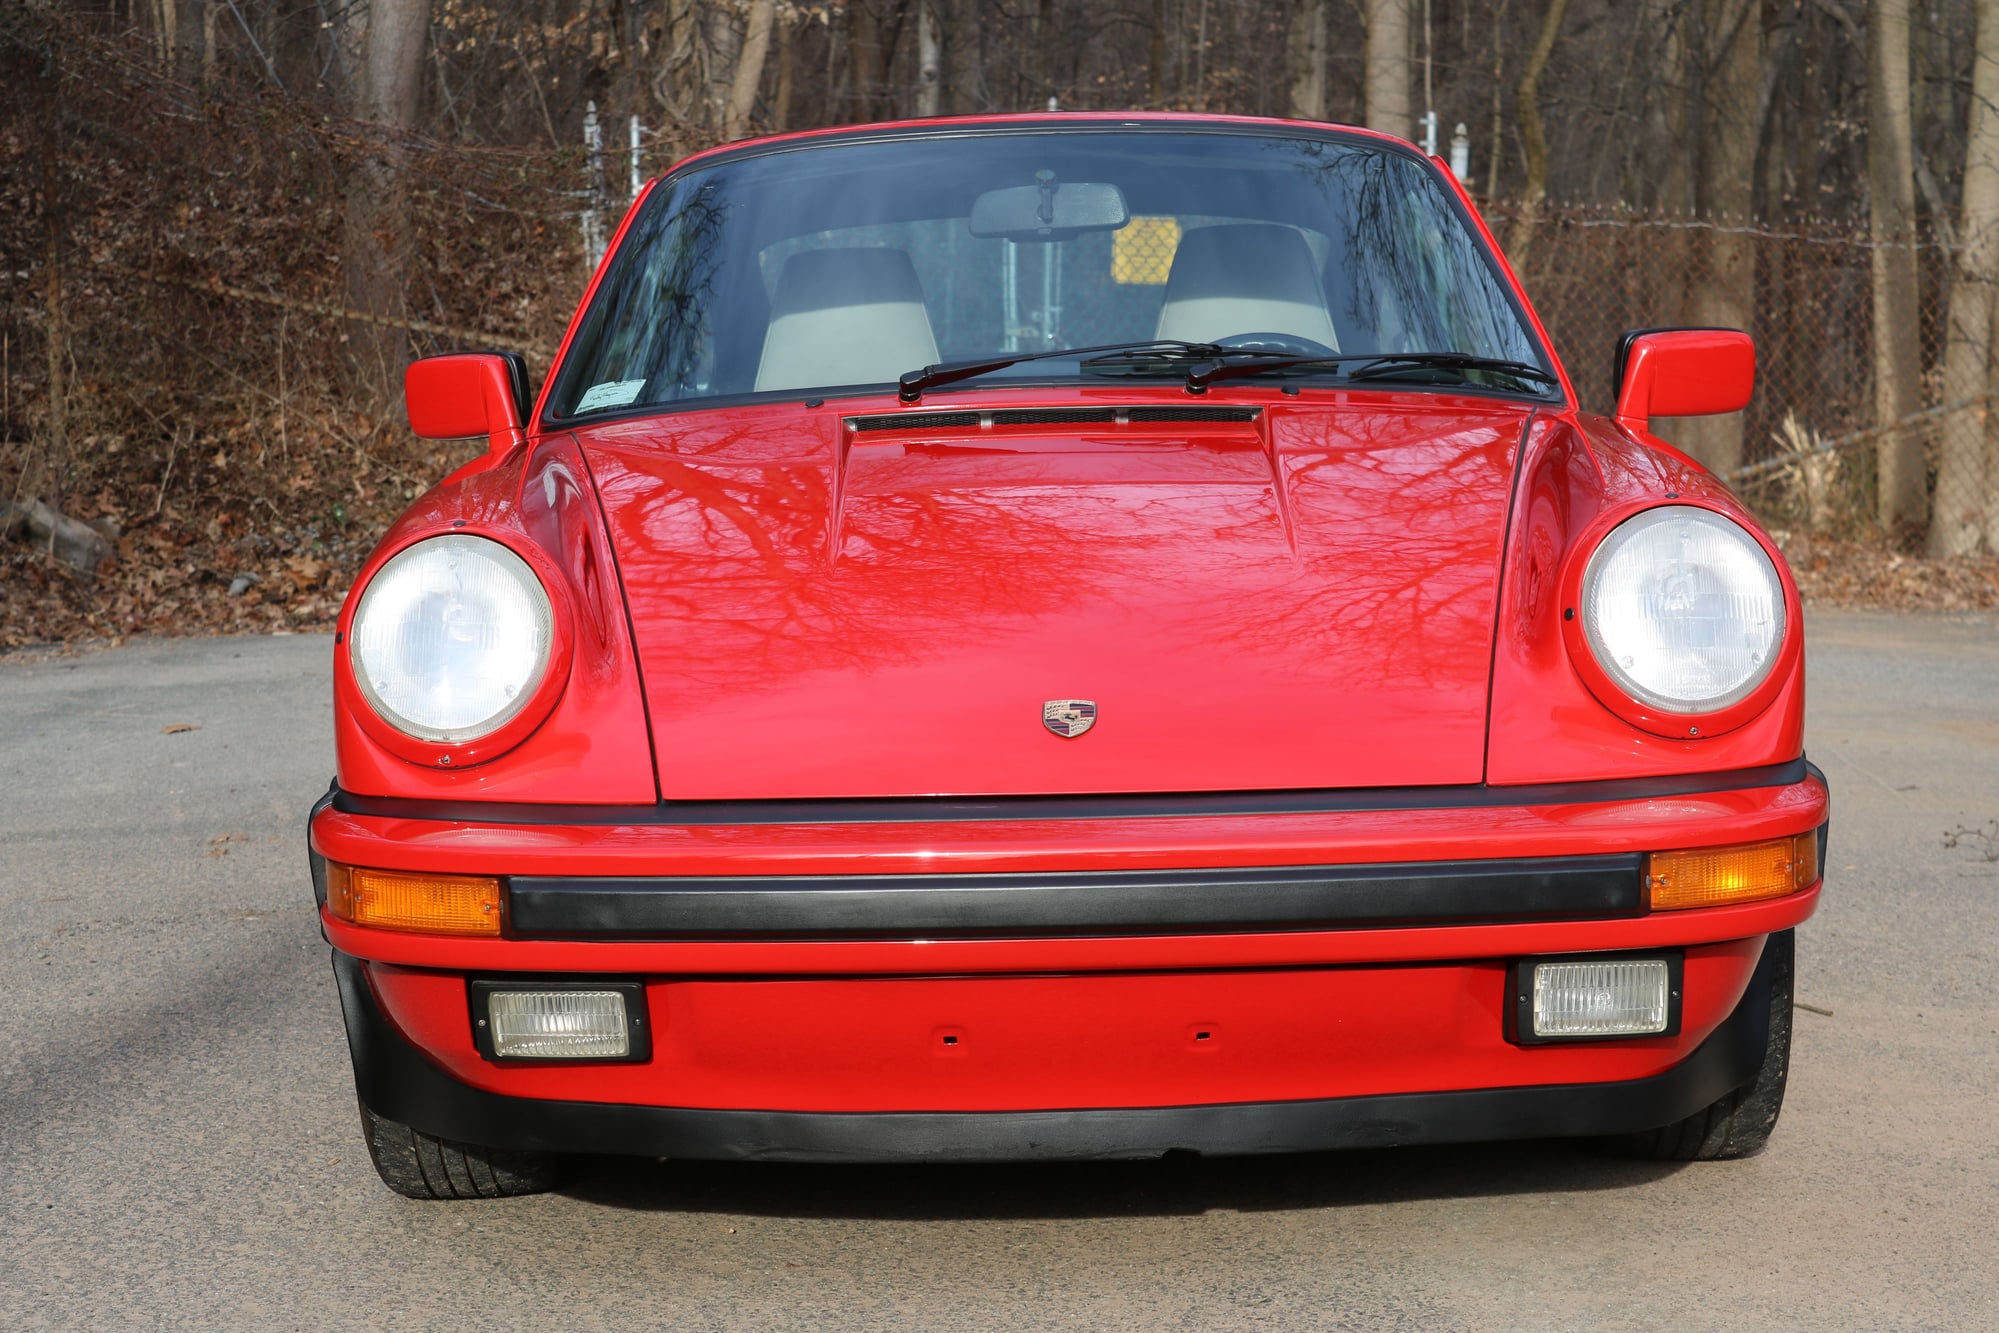 1989 Porsche 911 - 1989 3.2L Carrera G50 Manual Guards Red over Oyster Beige - Used - VIN WP0AB0919KS120736 - 159,000 Miles - 6 cyl - 2WD - Manual - Coupe - Red - Mountainside, NJ 07092, United States